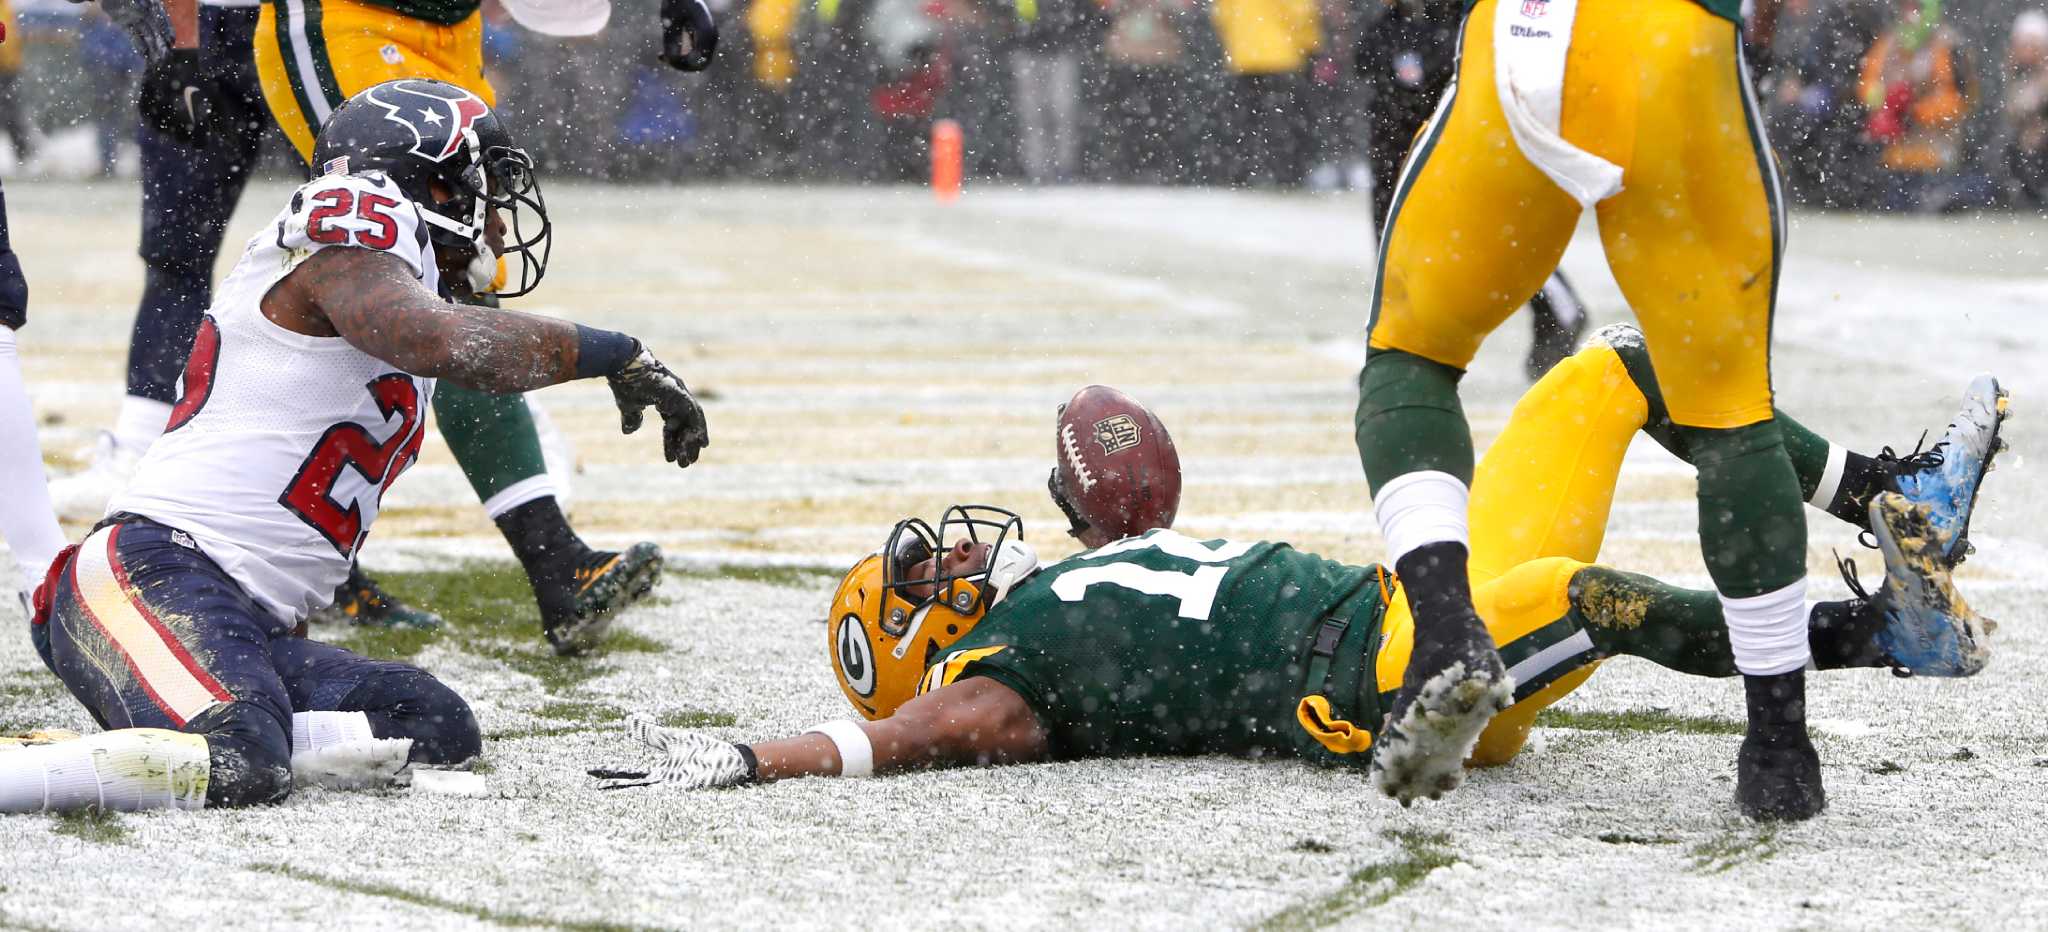 Green Bay Packers' Randall Cobb makes snow angel in end zone